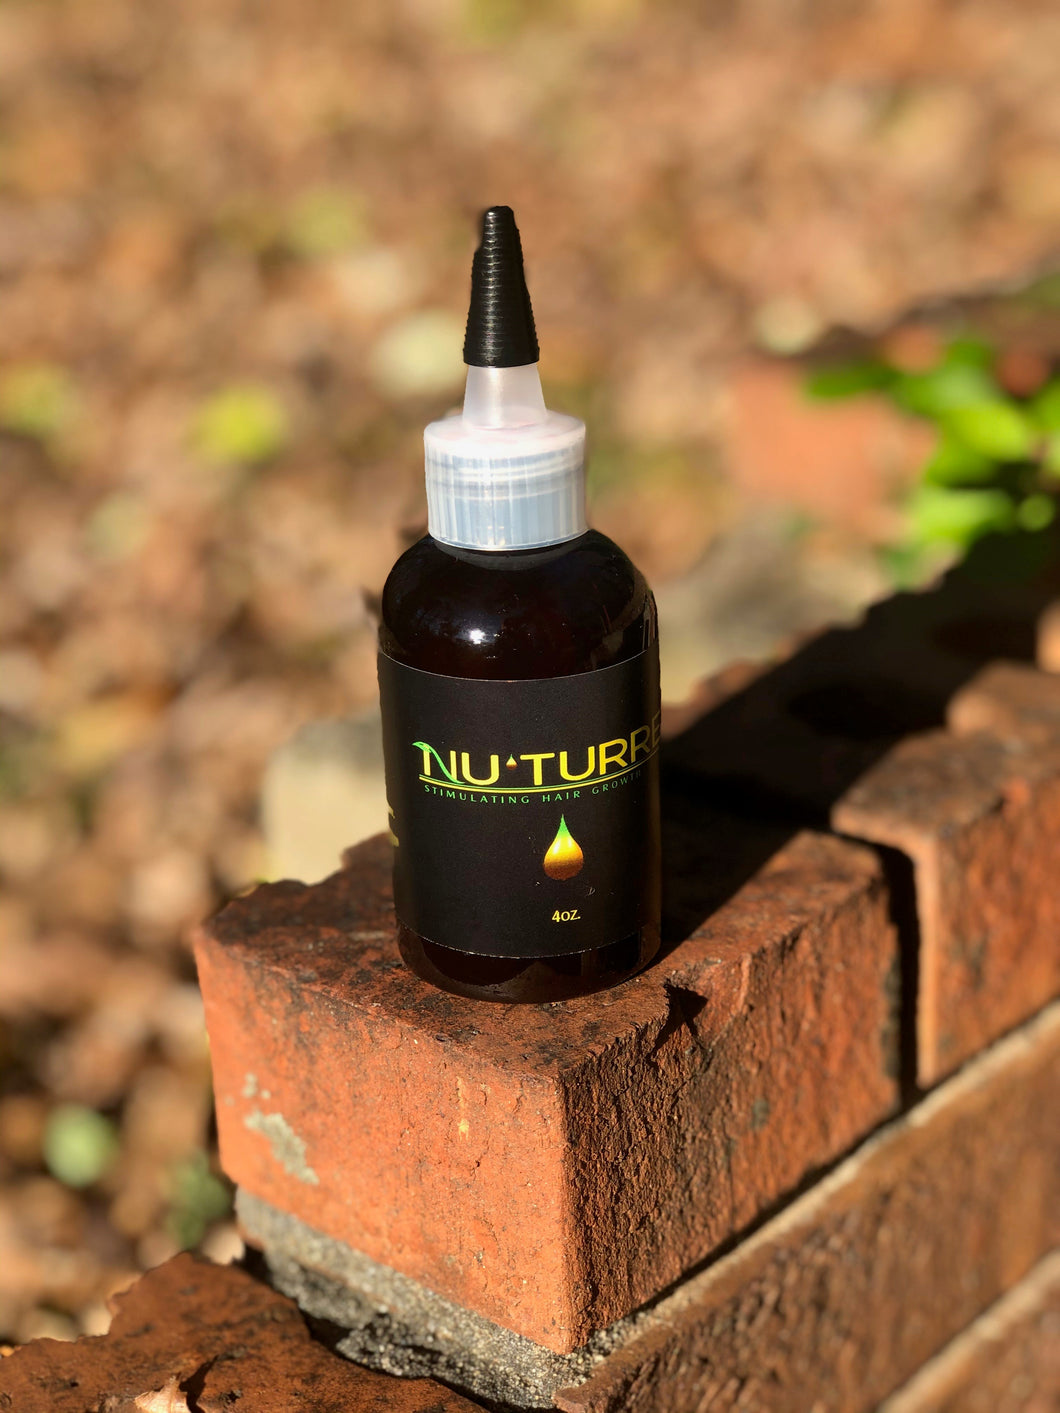 NuTurre Hair Growth Stimulating Oil